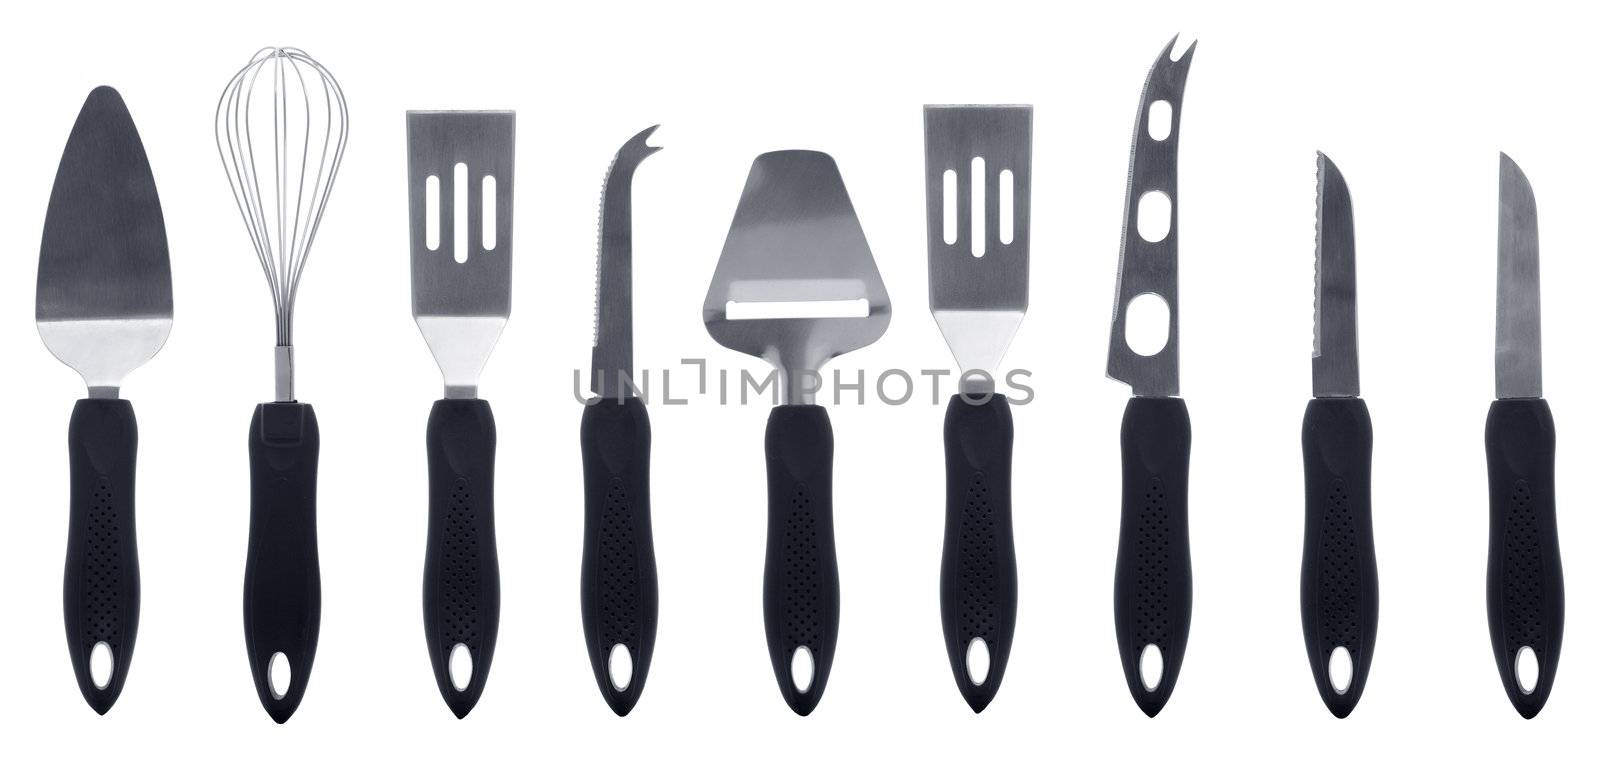 kitchen utensil collection isolated on white background.